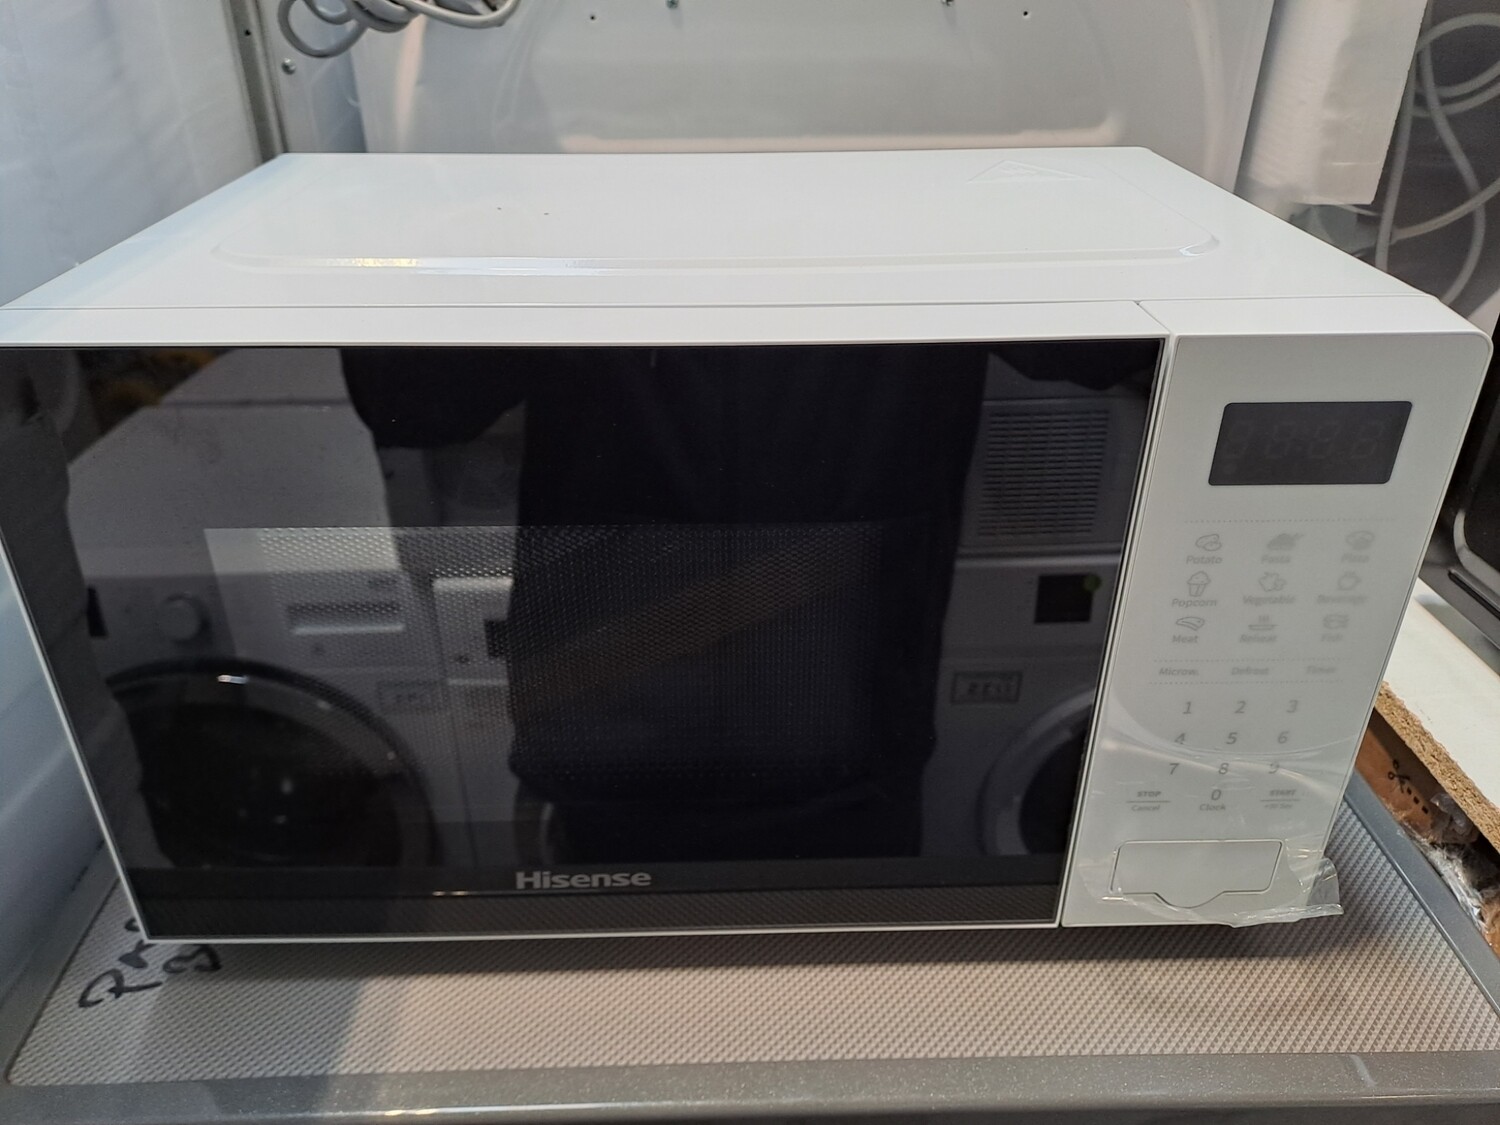 Hisense H20MOWS4UK Microwave Oven 700Watt 20Litre - White - New Graded - 6 Month Guarantee. This item is located at our Whitby Road Shop